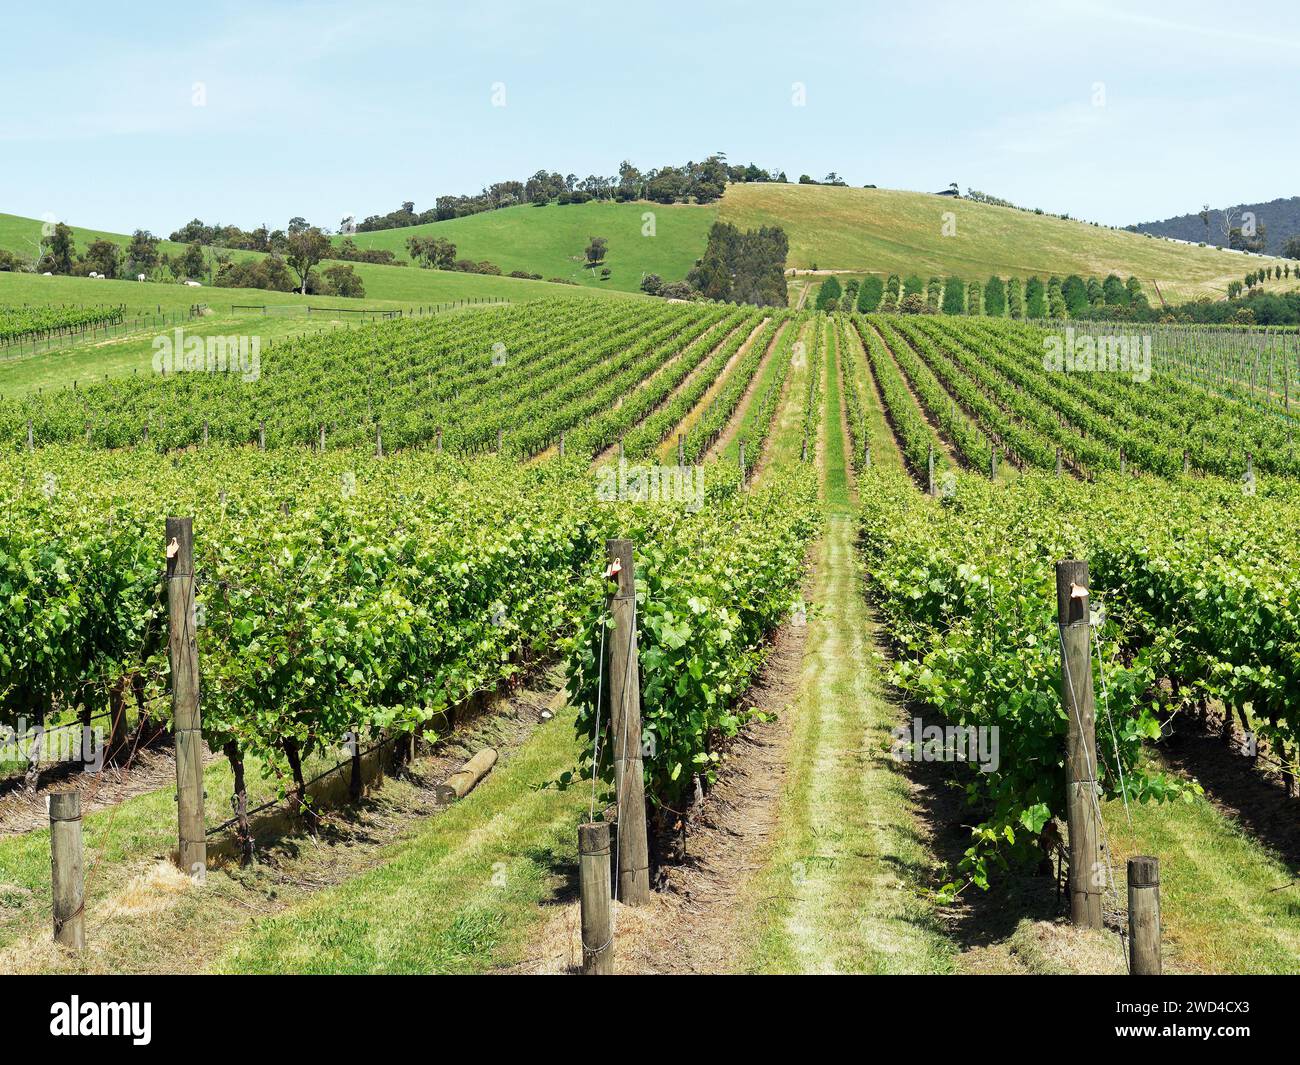 View looking down rows of vines in the Yarra Valley Victoria Australia Stock Photo